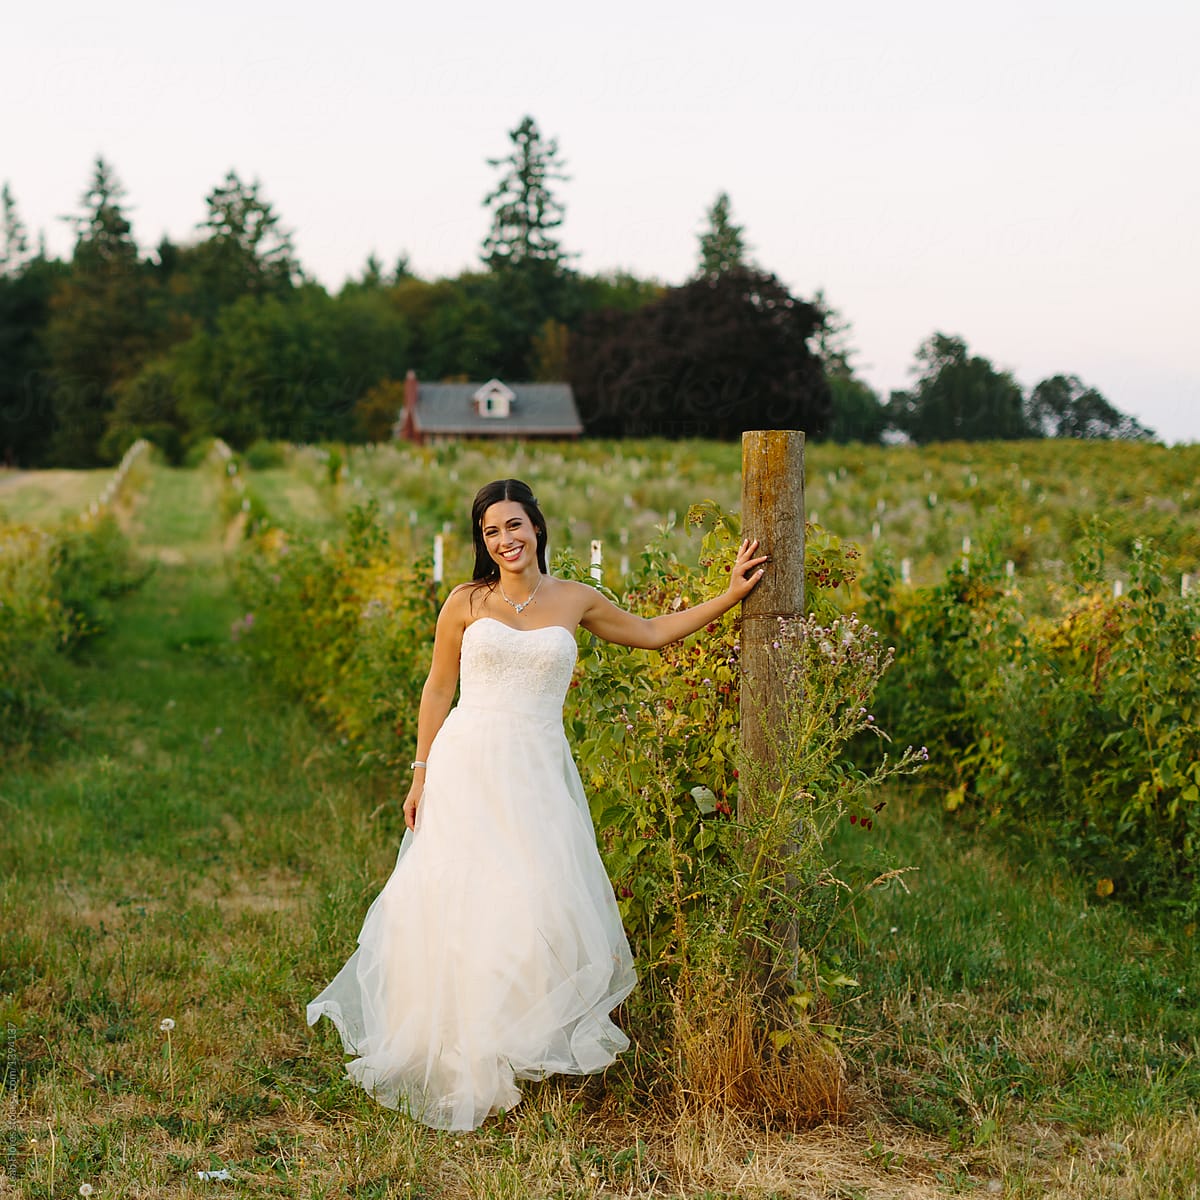 Bride Leans on Post at Farm